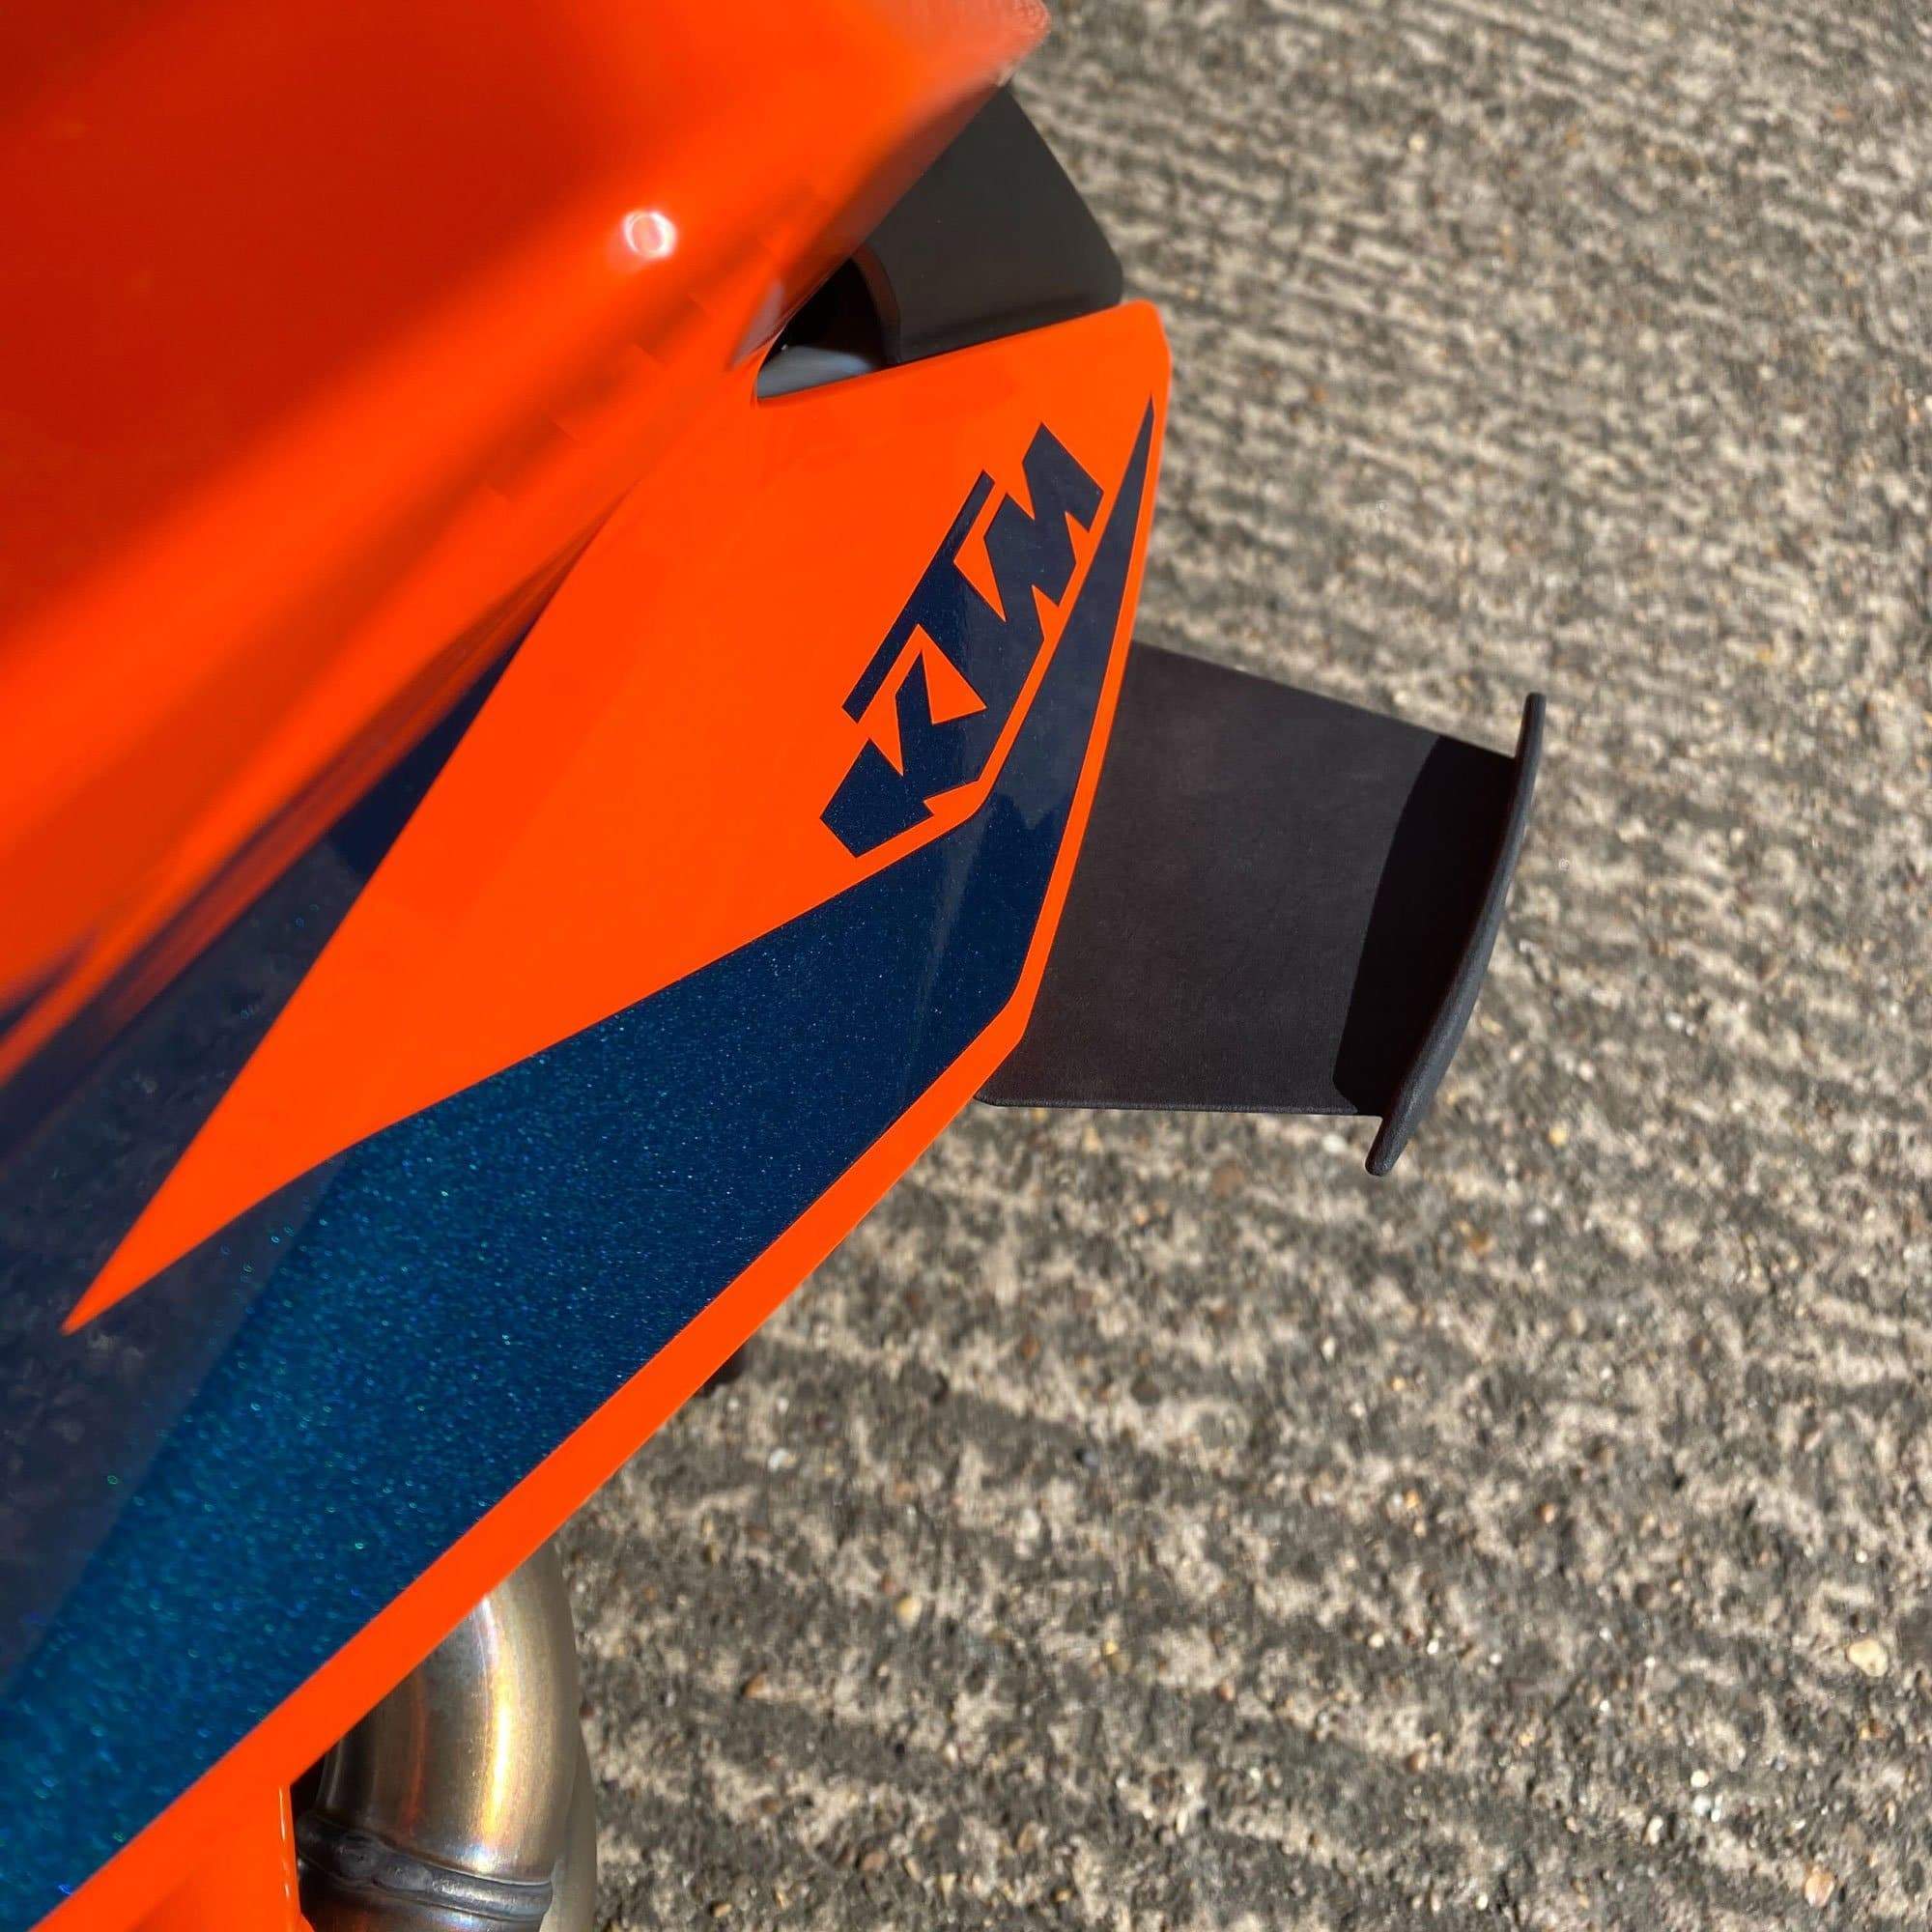 Pyramid GP Wings | Satin Black | KTM 1290 Superduke R 2020>Current-31900M-Side Spoilers-Pyramid Motorcycle Accessories